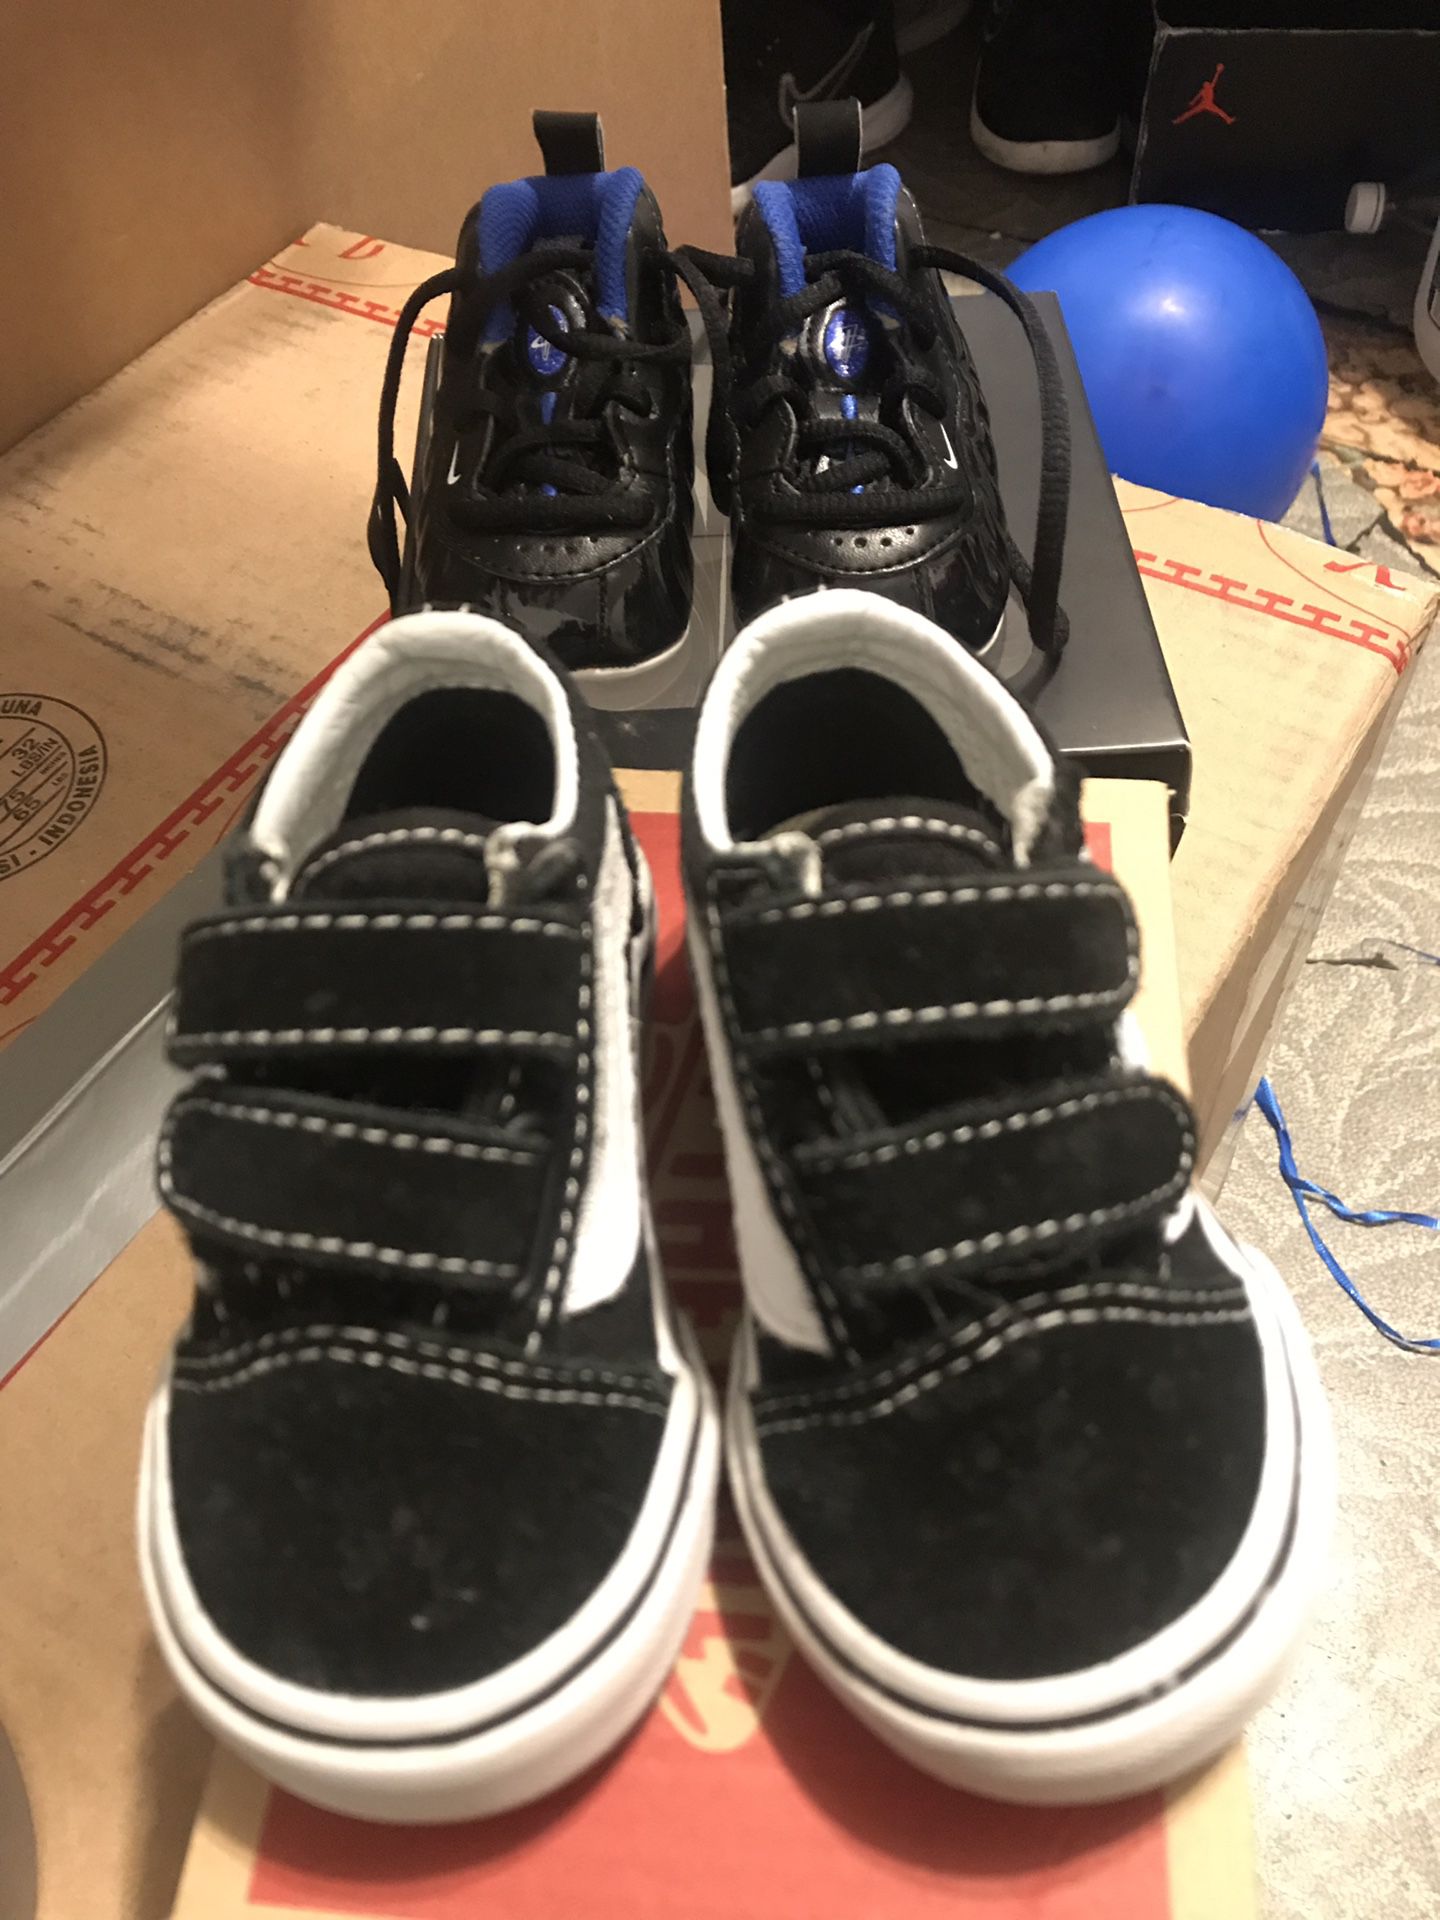 Baby shoes for Sale